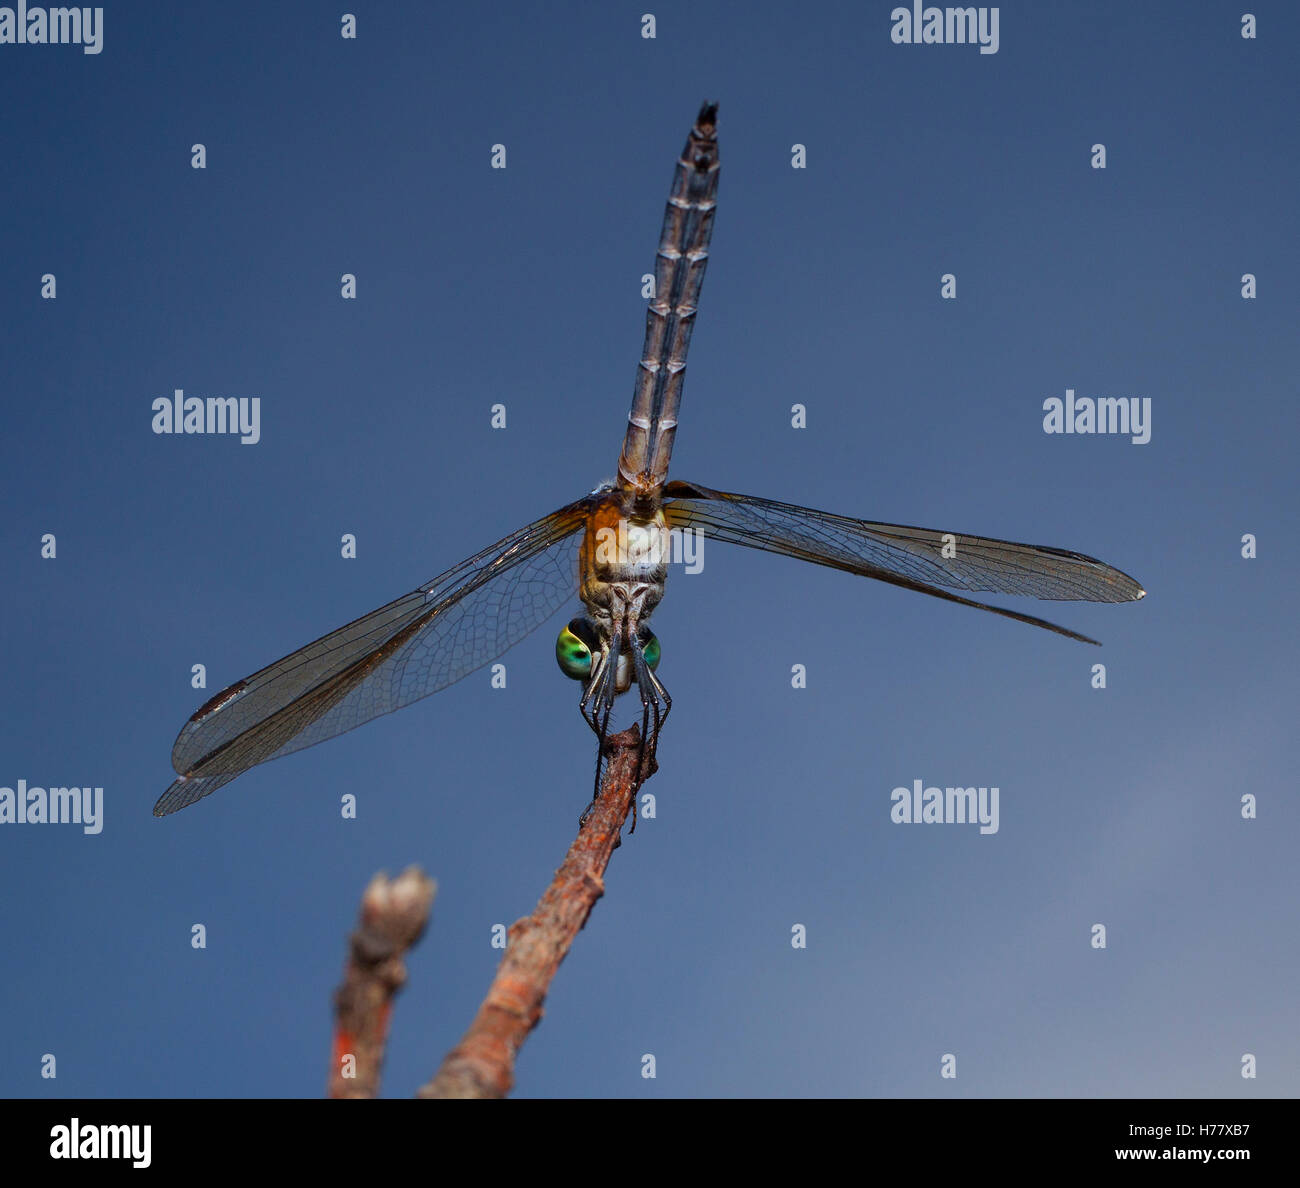 View from behind and underneath a dragonfly on a branch Stock Photo